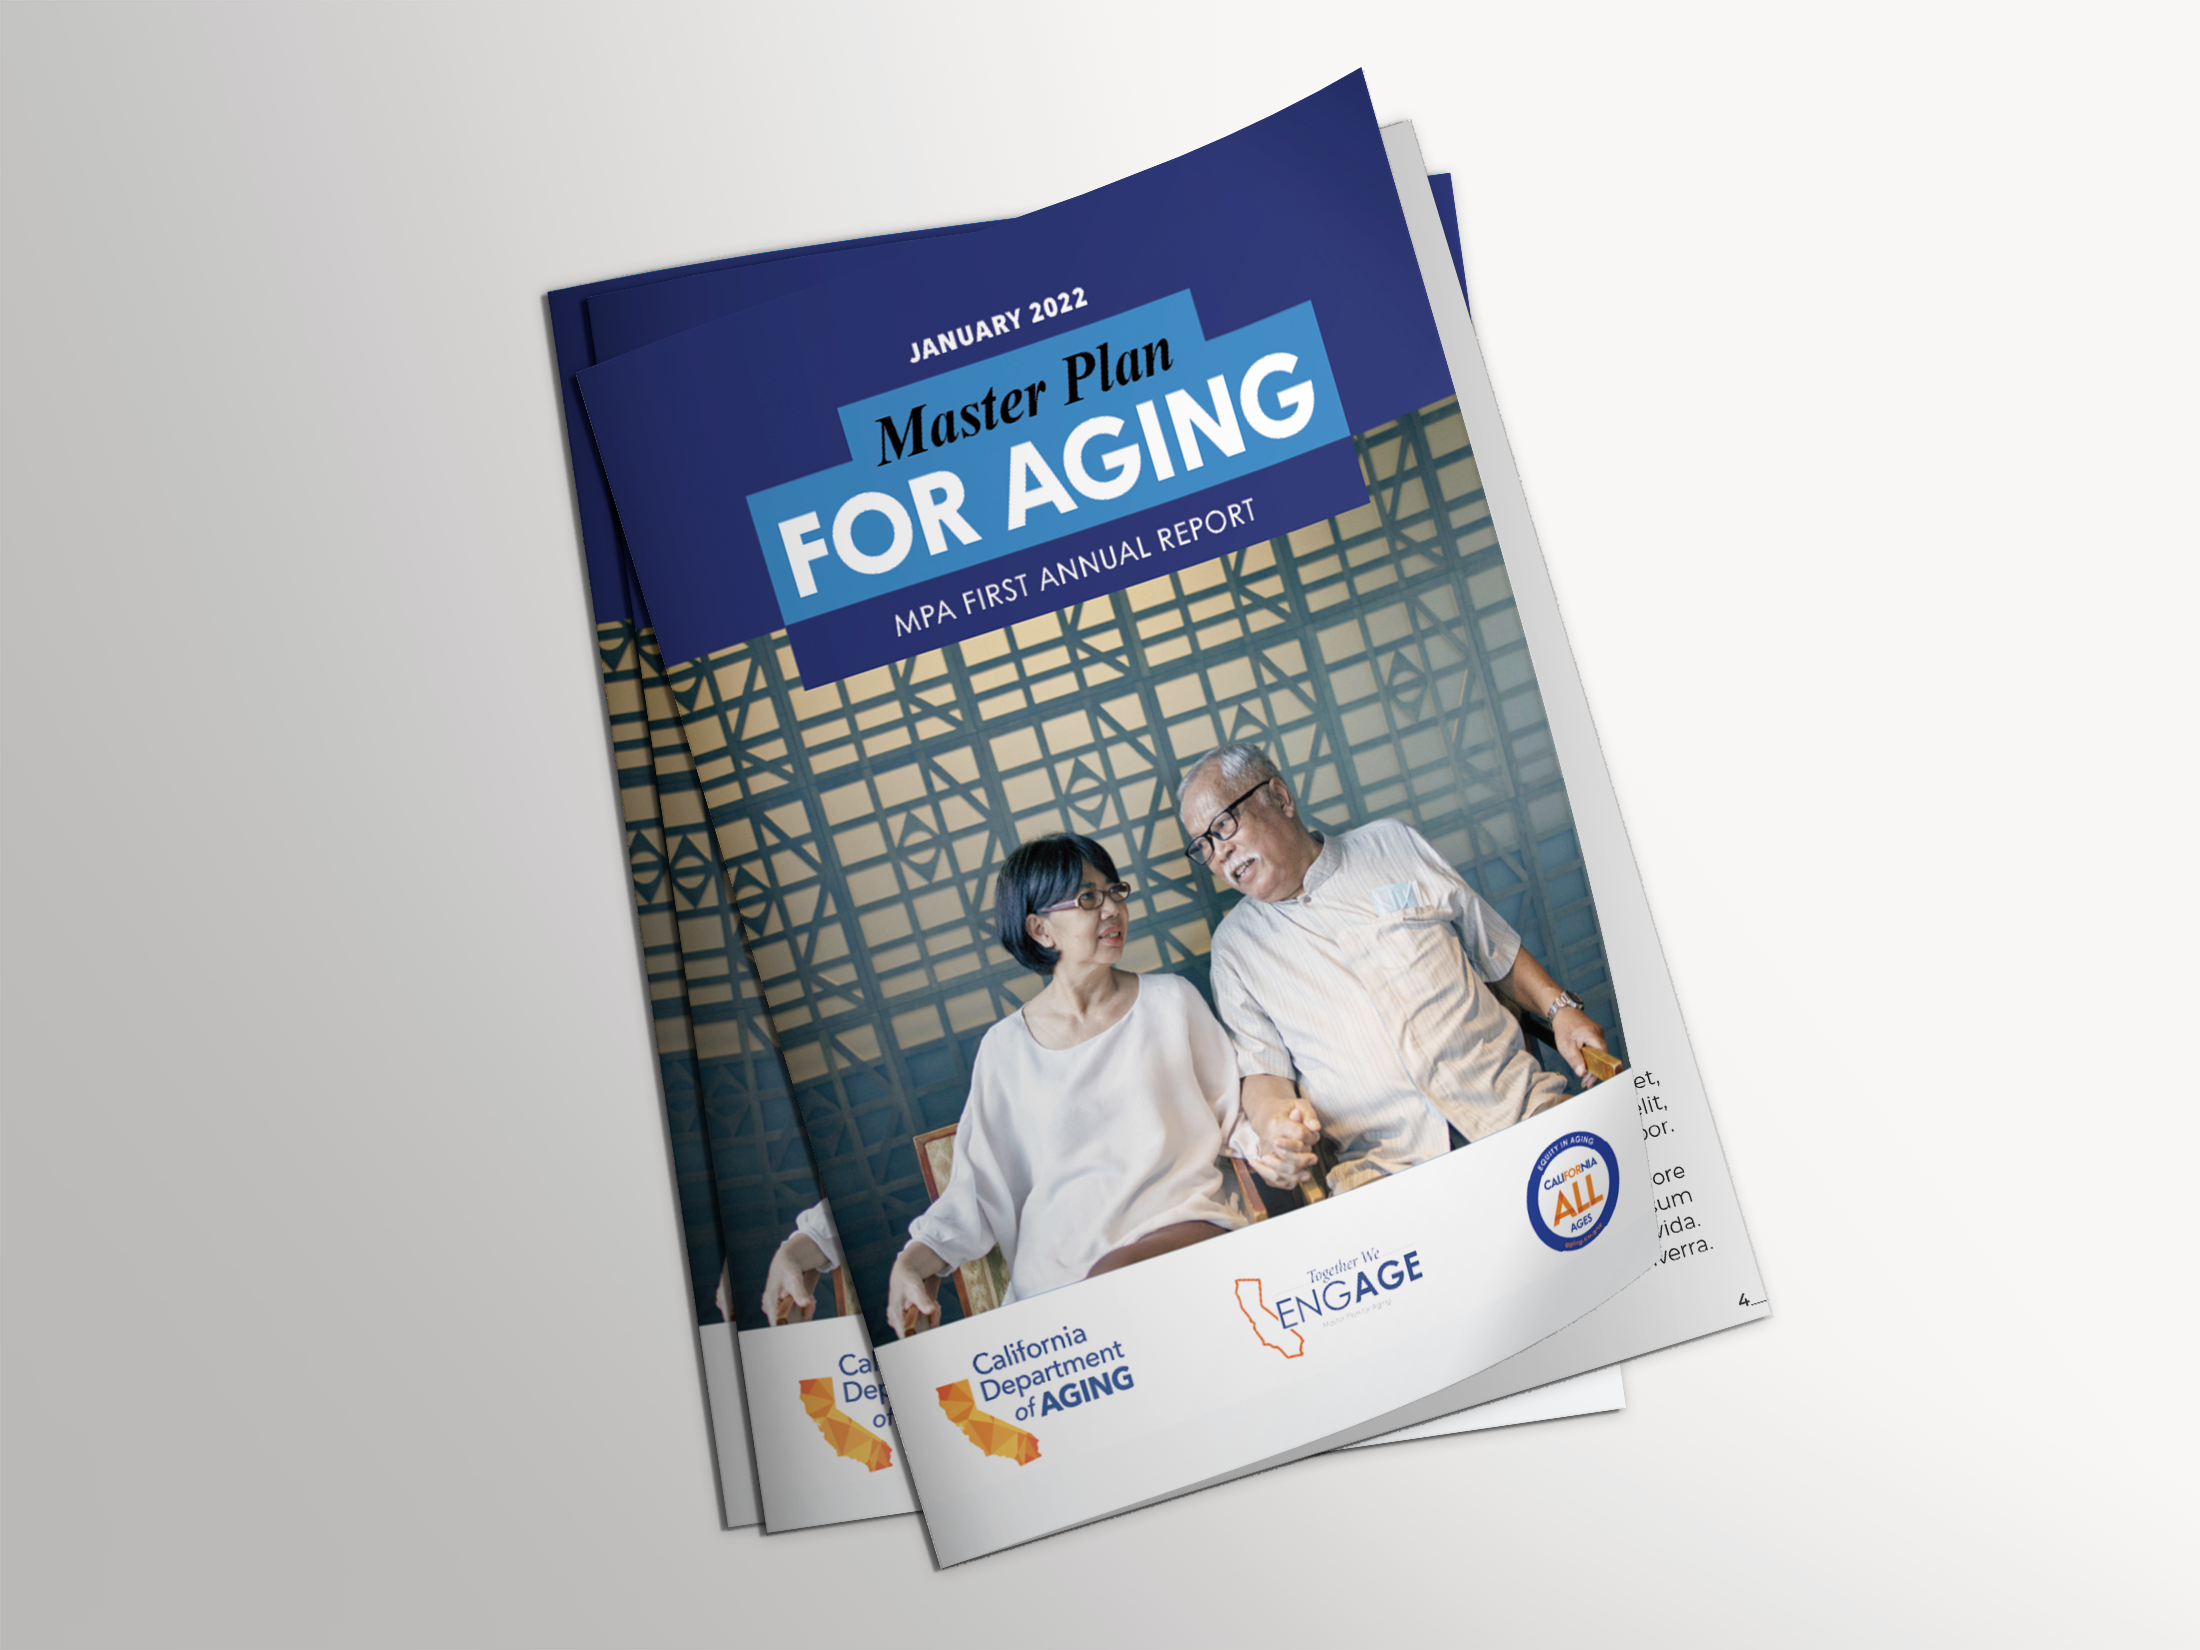 A stack of three Master Plan for Aging Annual Reports